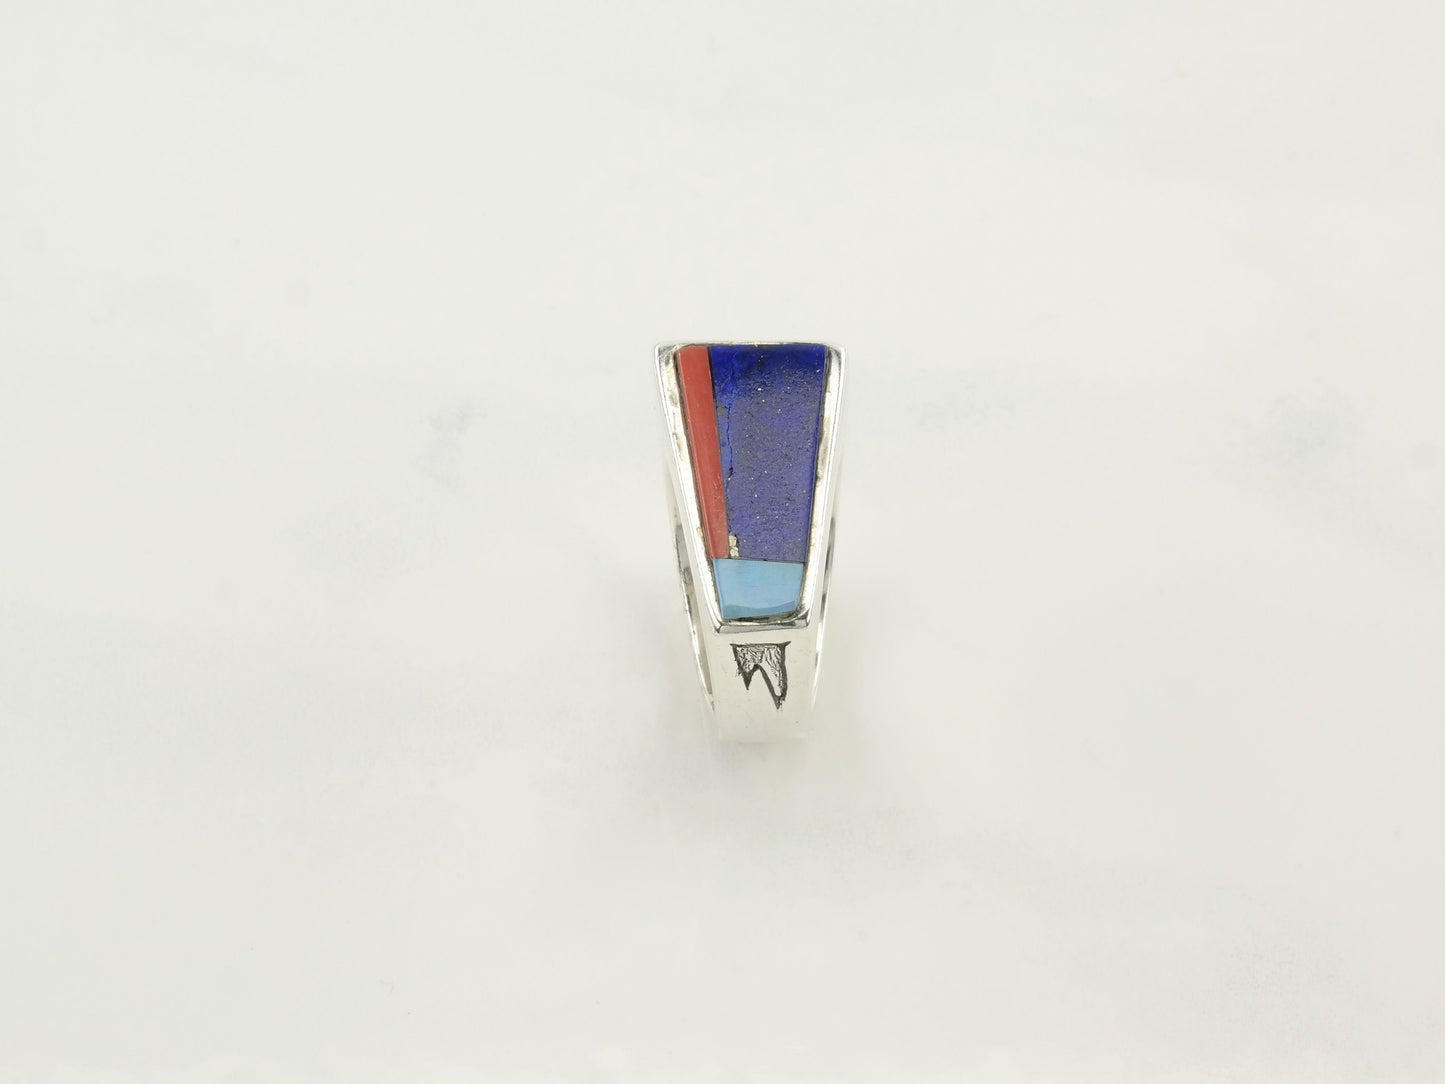 Vintage Native American Silver Ring Lapis Coral Opal Inlay Sterling Multicolor Size 8 1/4